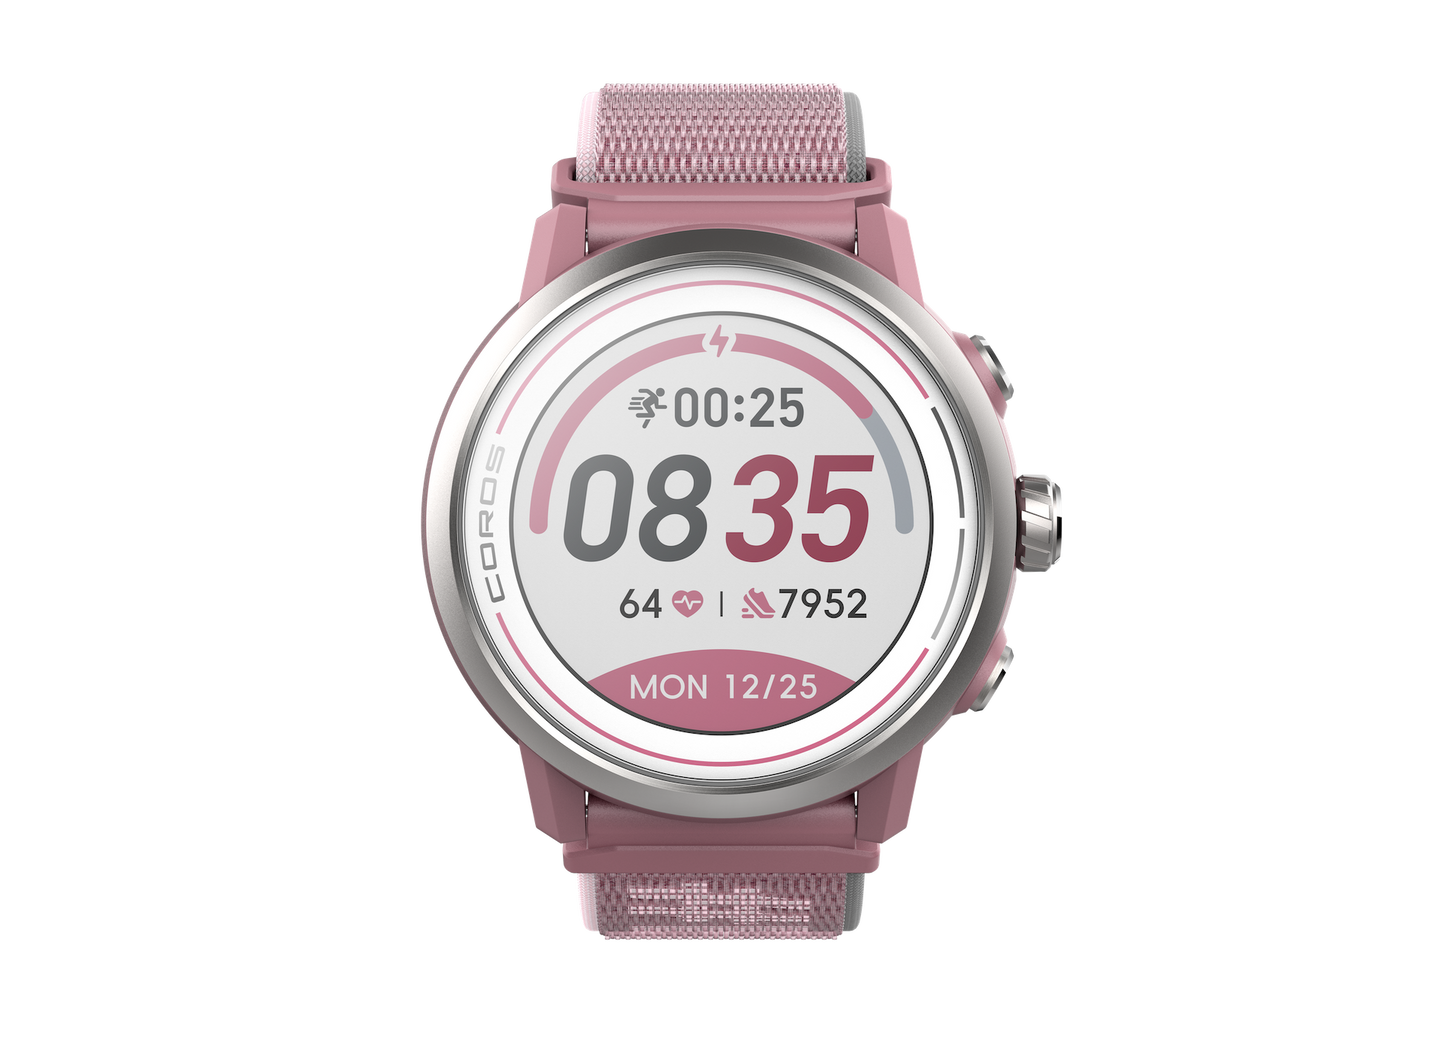 COROS - APEX 2 GPS Outdoor Watch - Dusty Pink (Limited Edition)